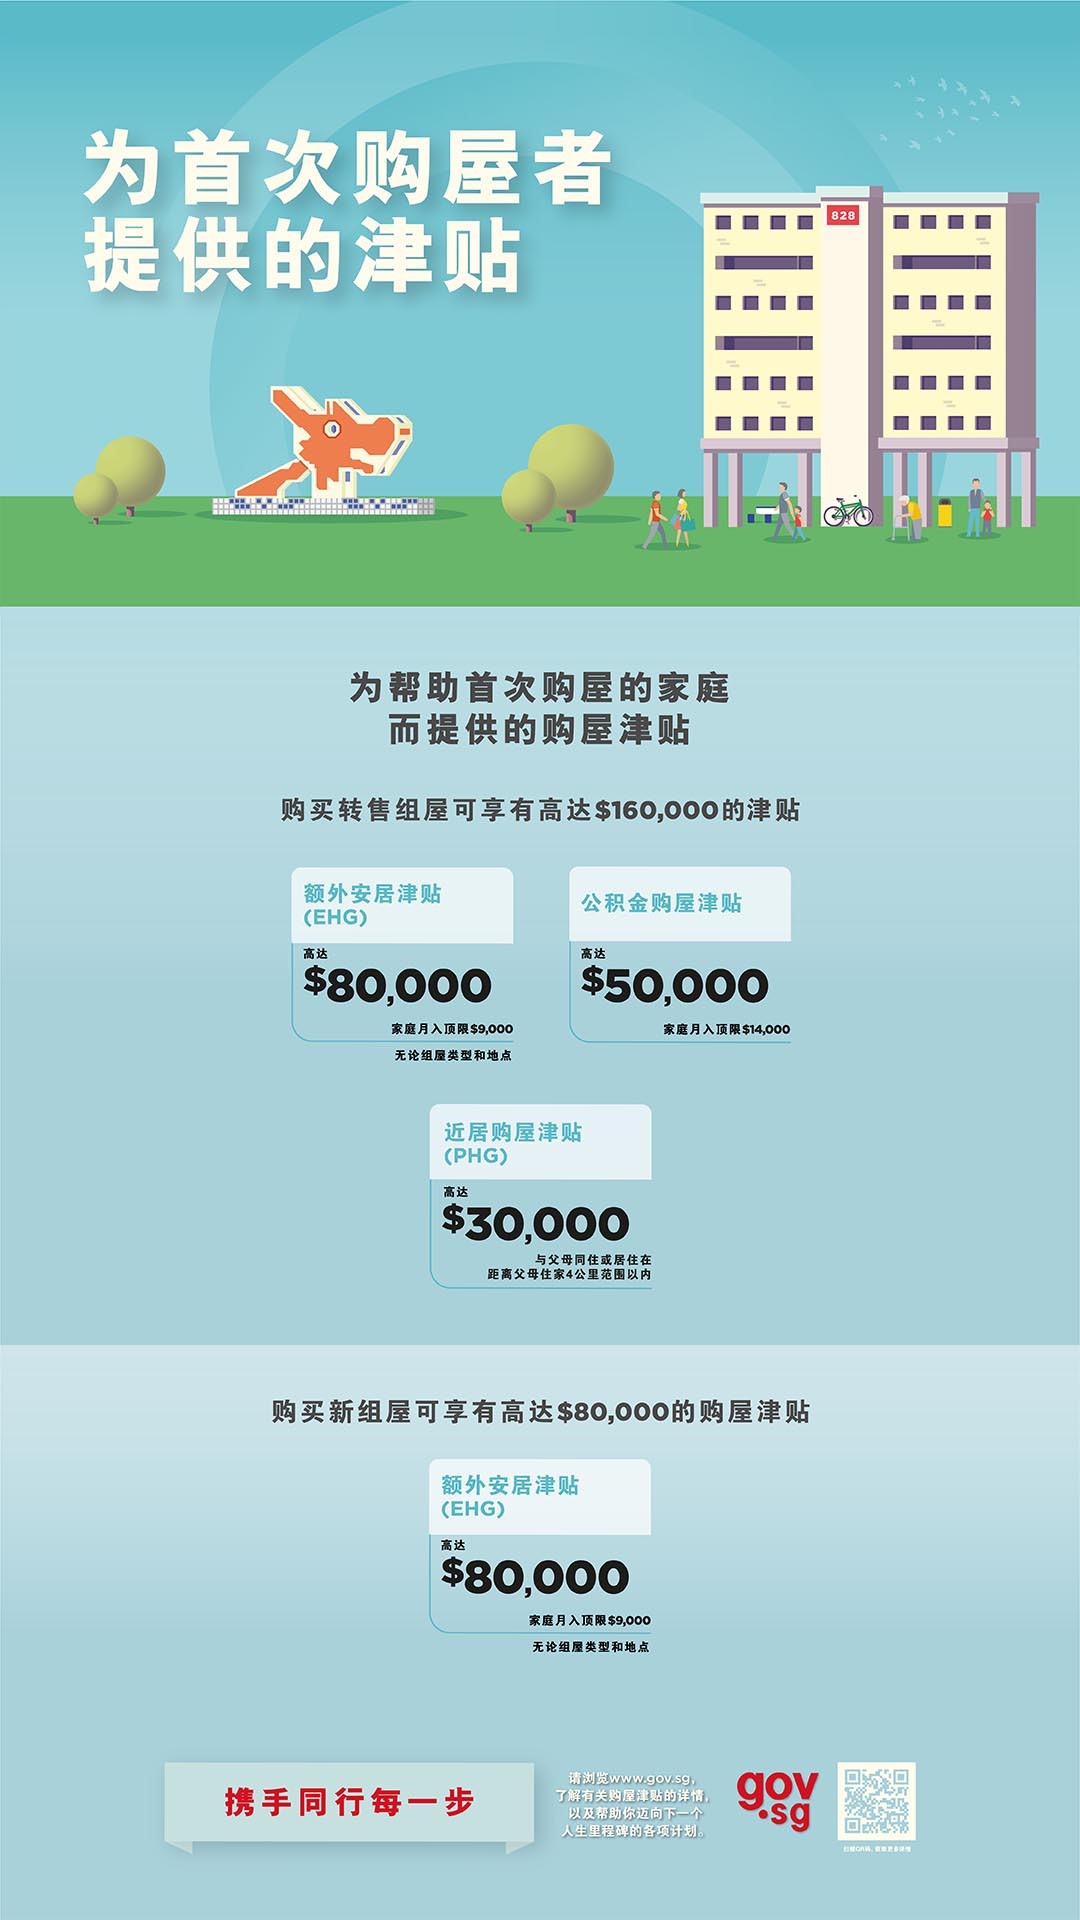 Chinese - Supporting you in your home ownership journey